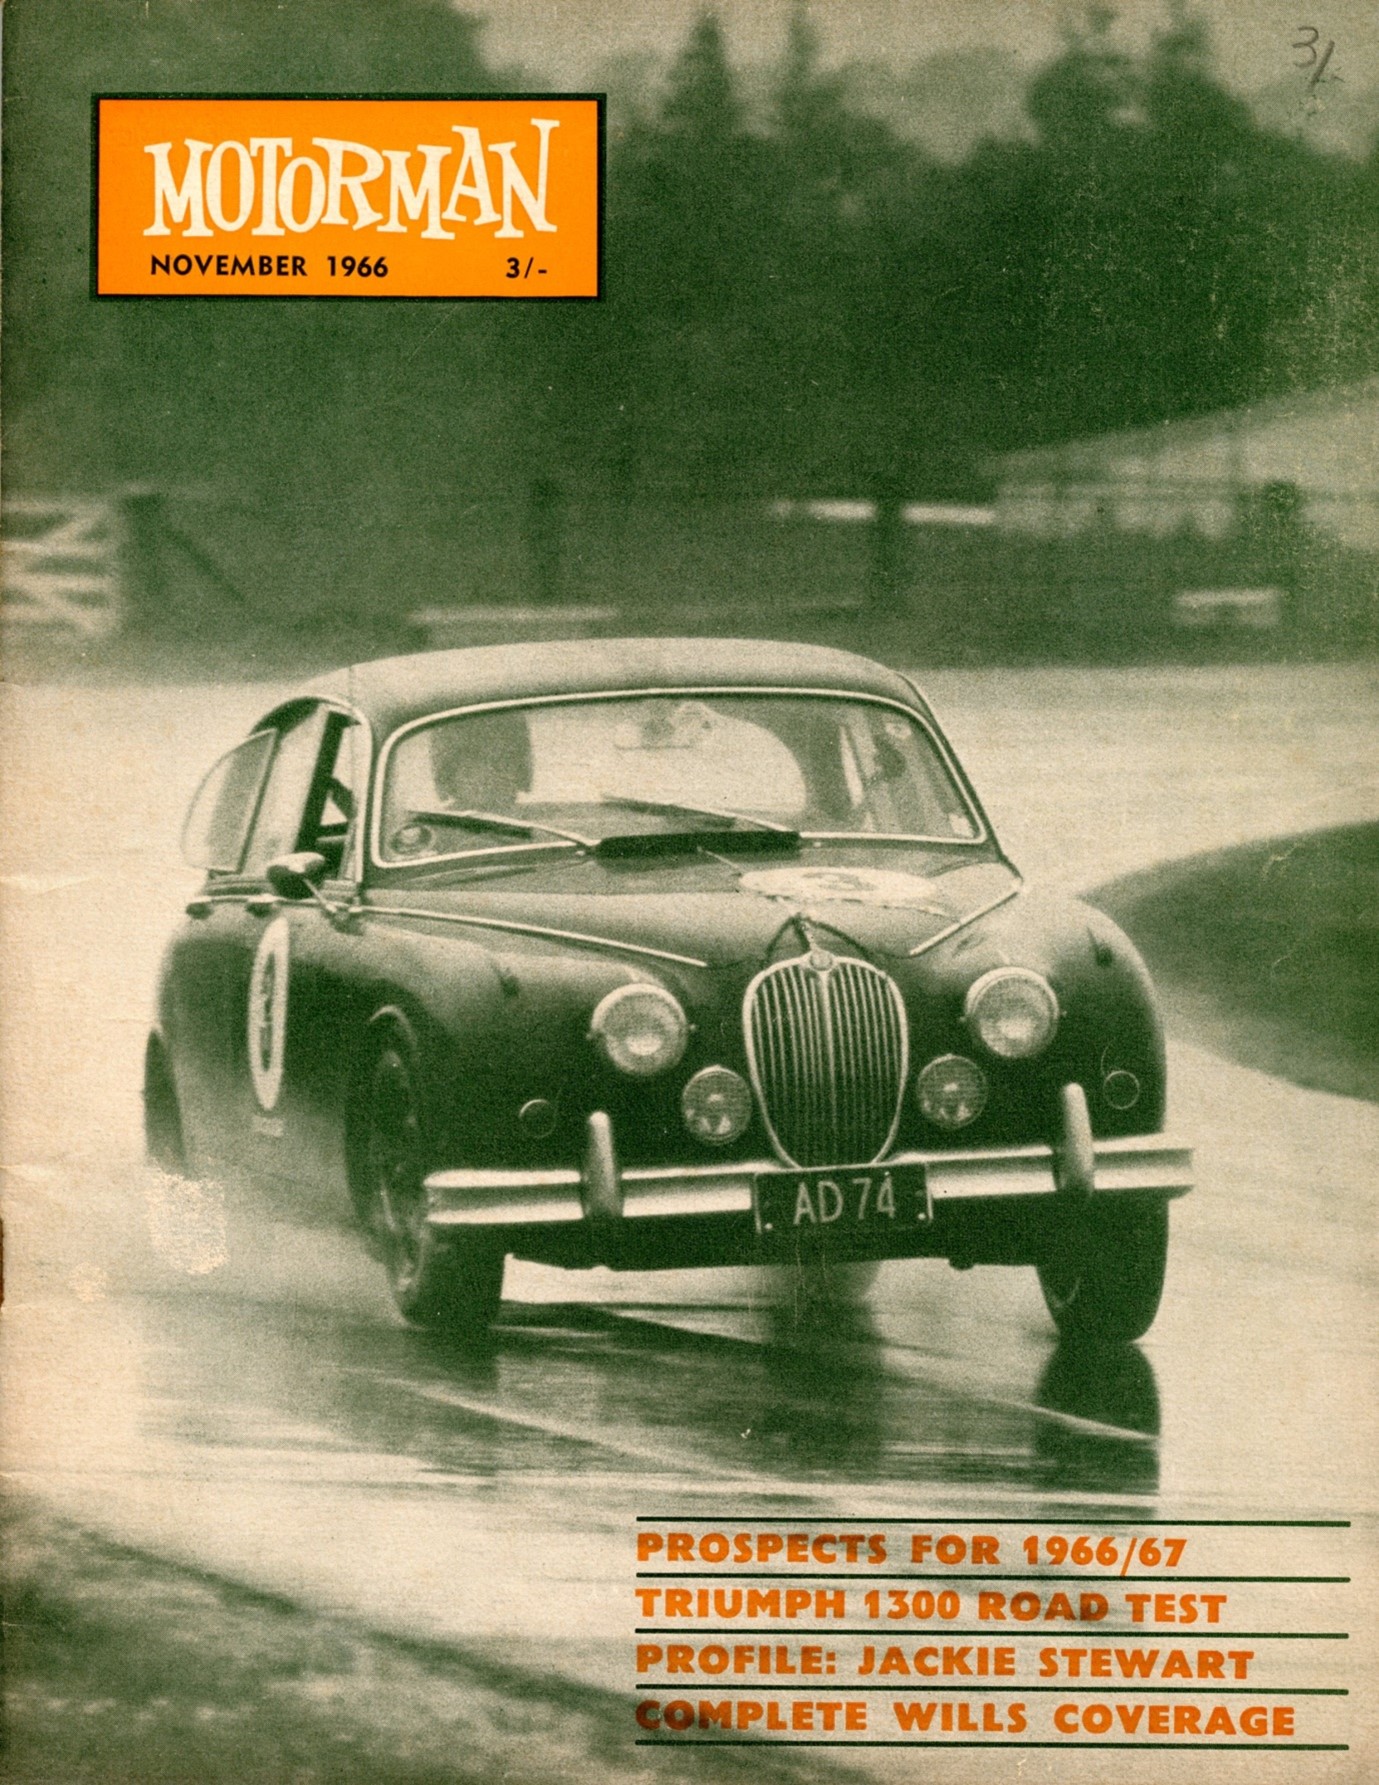 Pukekohe 8 Oct 66 – Will Six-Hour – “The spray flies on a wet streaming Pukekohe circuit as Ray Archibald takes the winning Jaguar 3.8 through the Esses” – photo & caption Motorman Nov 66